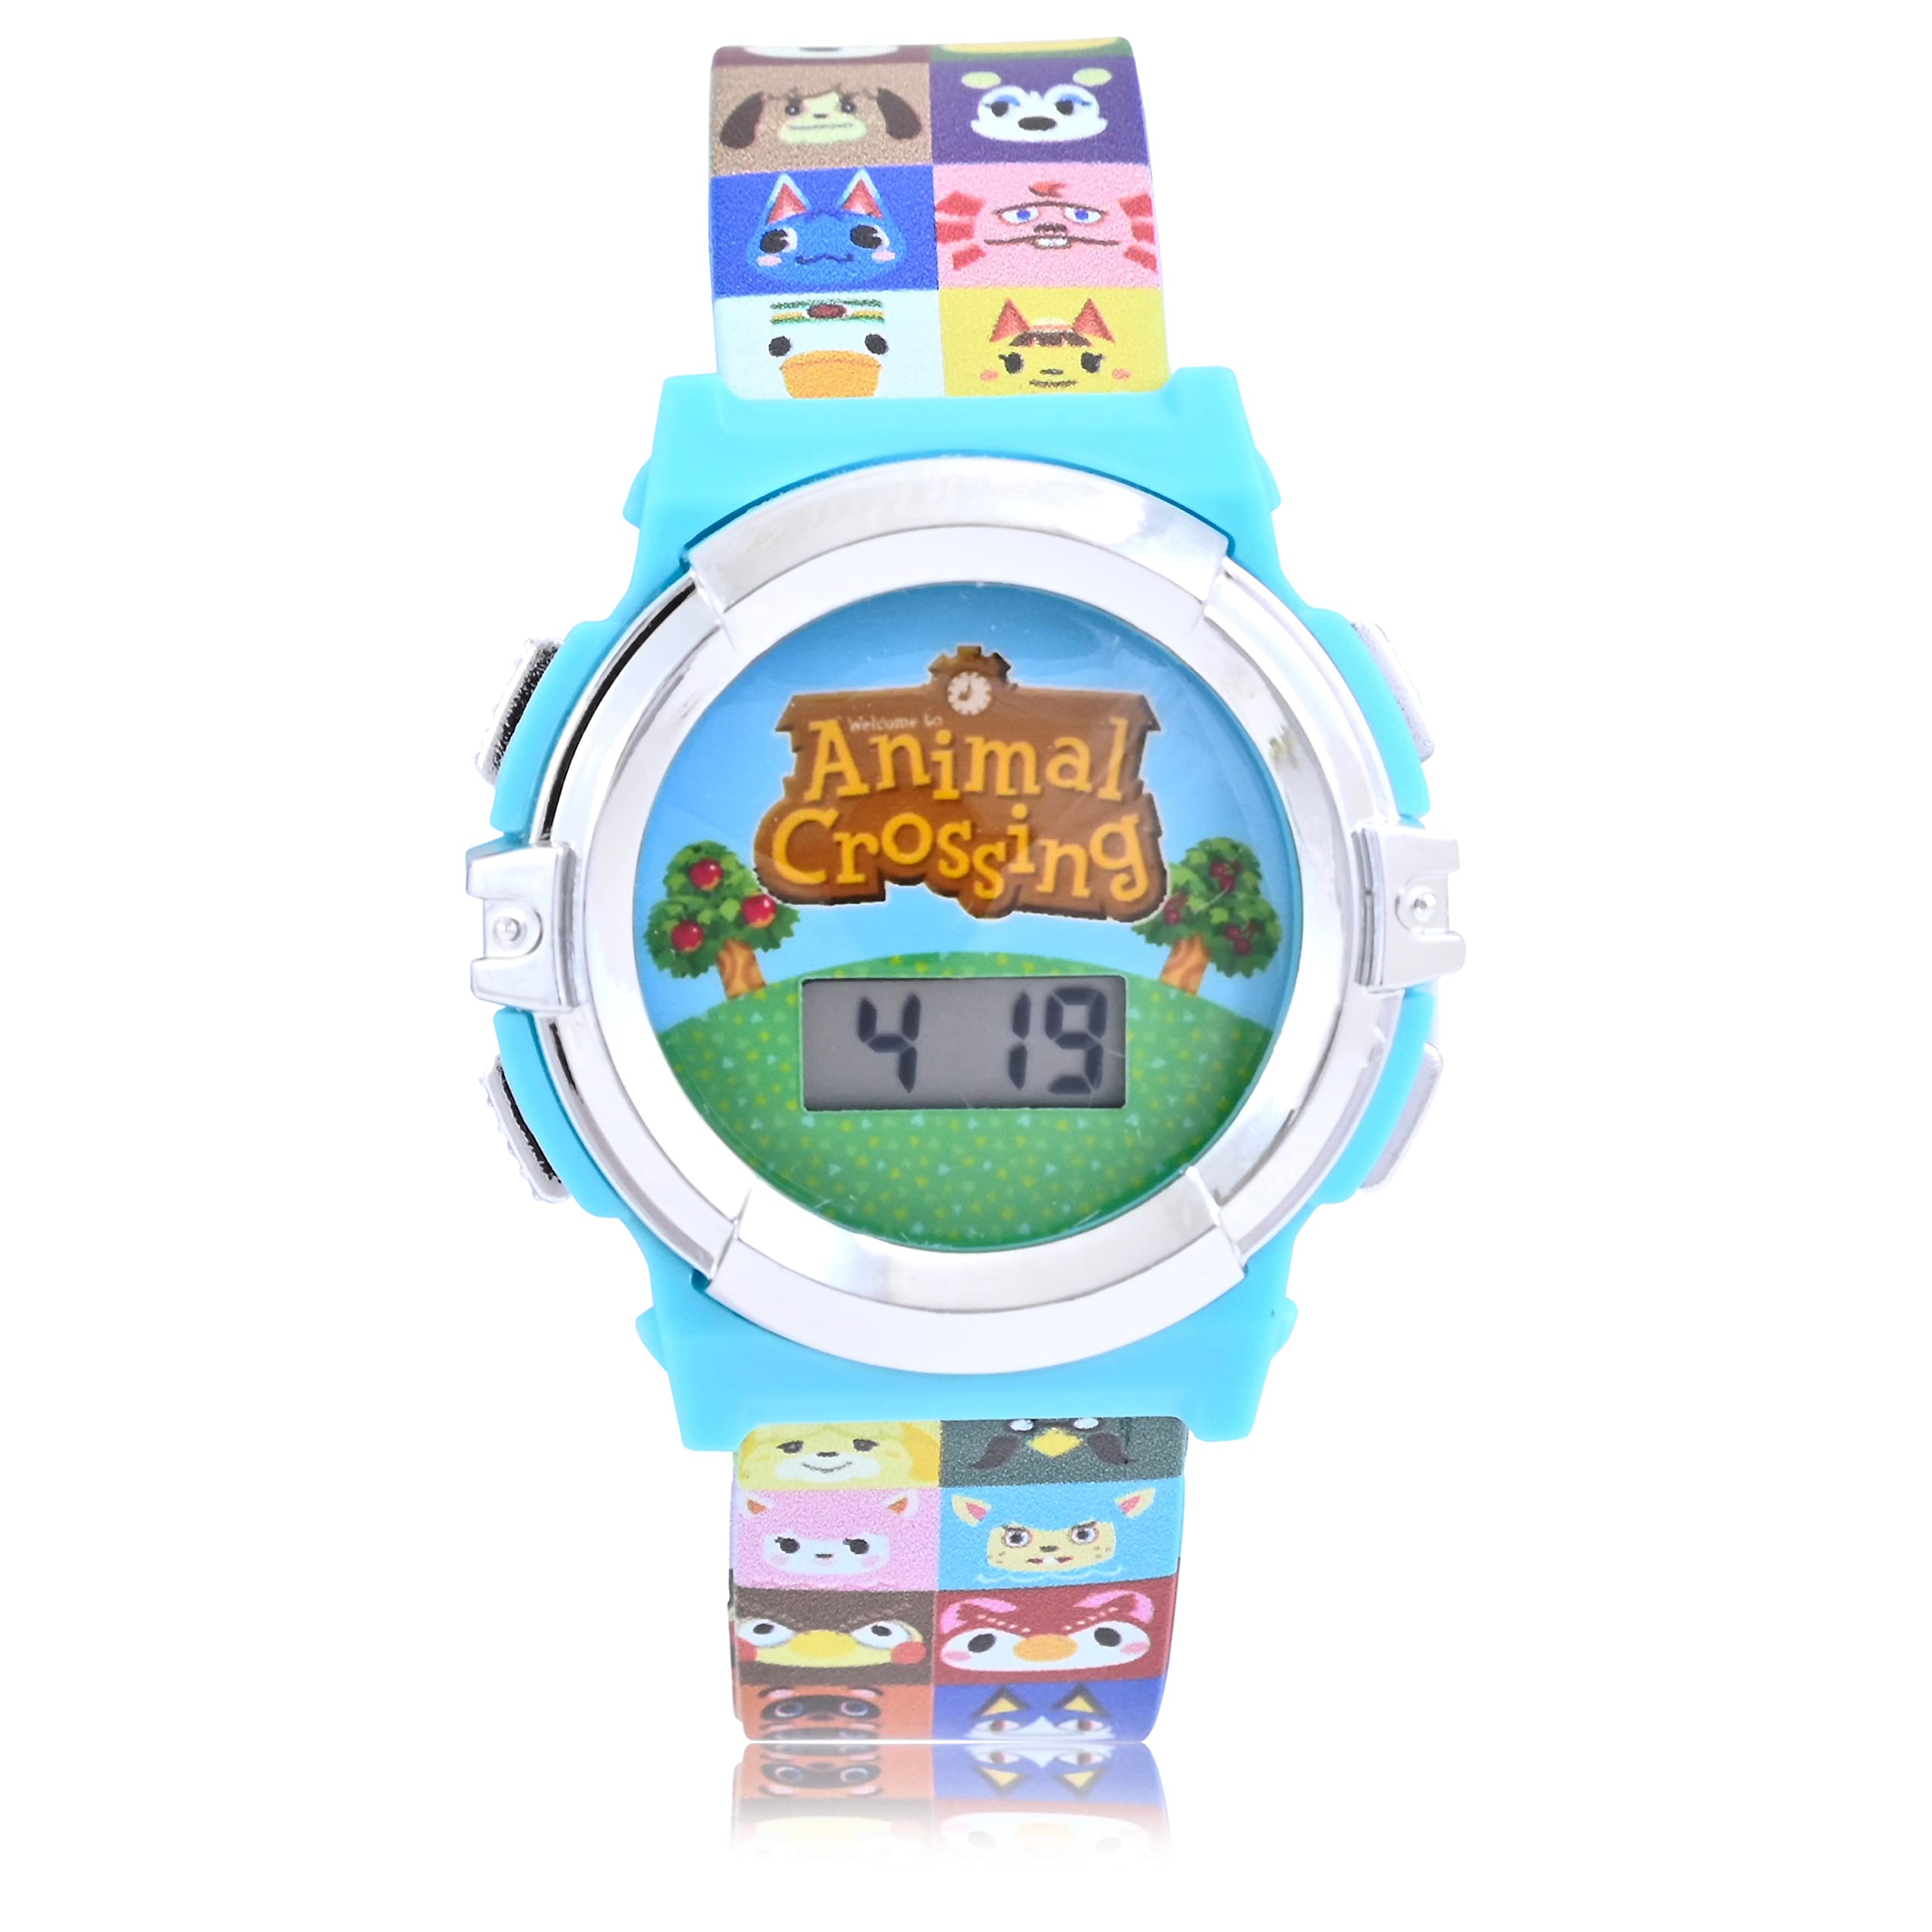 Accutime Animal Crossing Kids Digital Watch - LED Flashing Lights, LCD Watch Display, Kids, Girls Or Boys Watch, Plastic Strap in Multi Color Band (Model: ANC4003AZ)